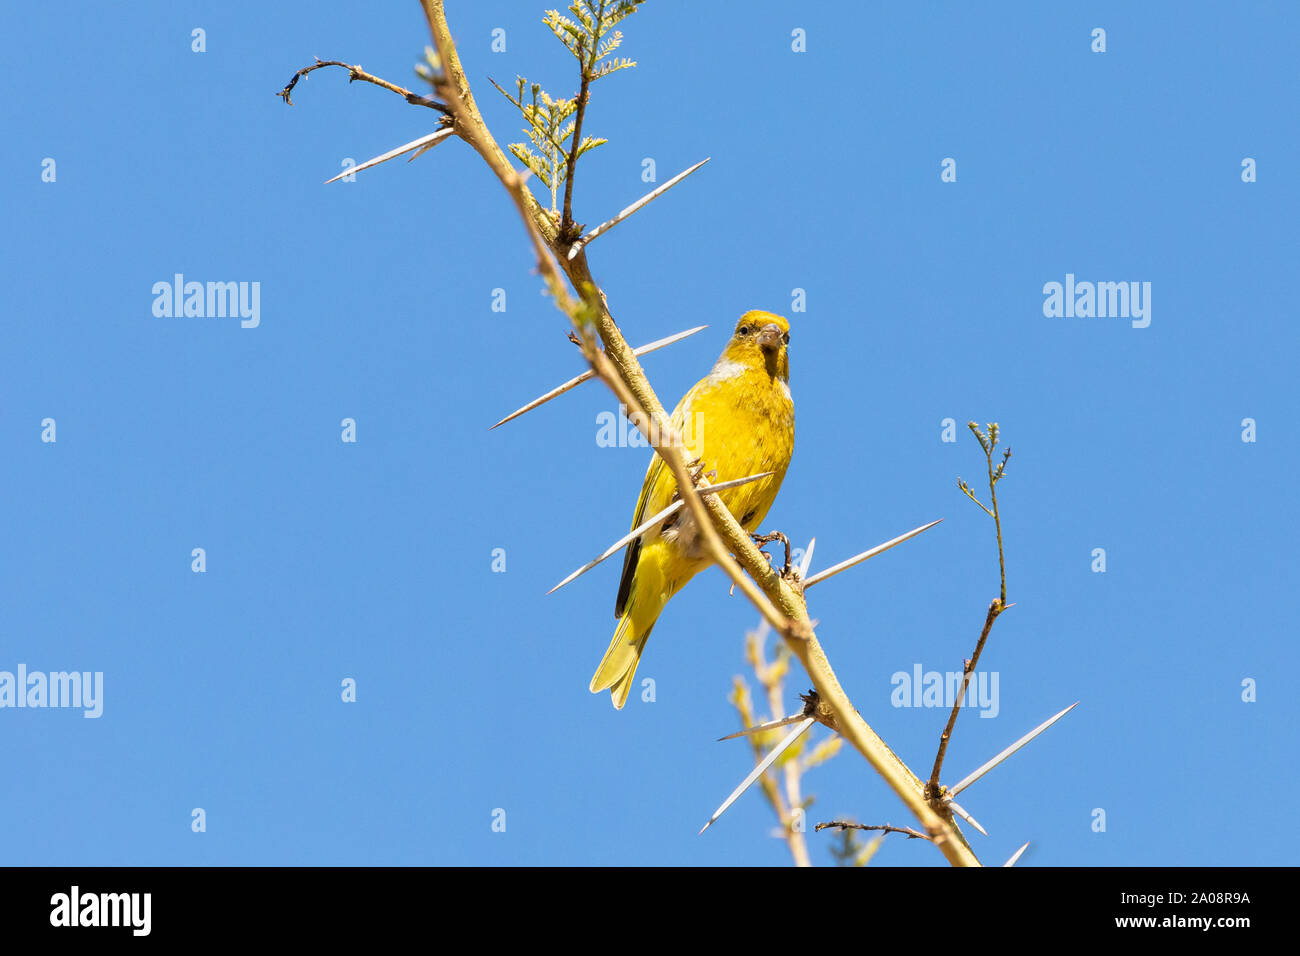 Yellow Cape Canary (Serinus canicollis) perched on a Fever Tree or Acacia Thorn Tree in winter, Western Cape, South Africa Stock Photo